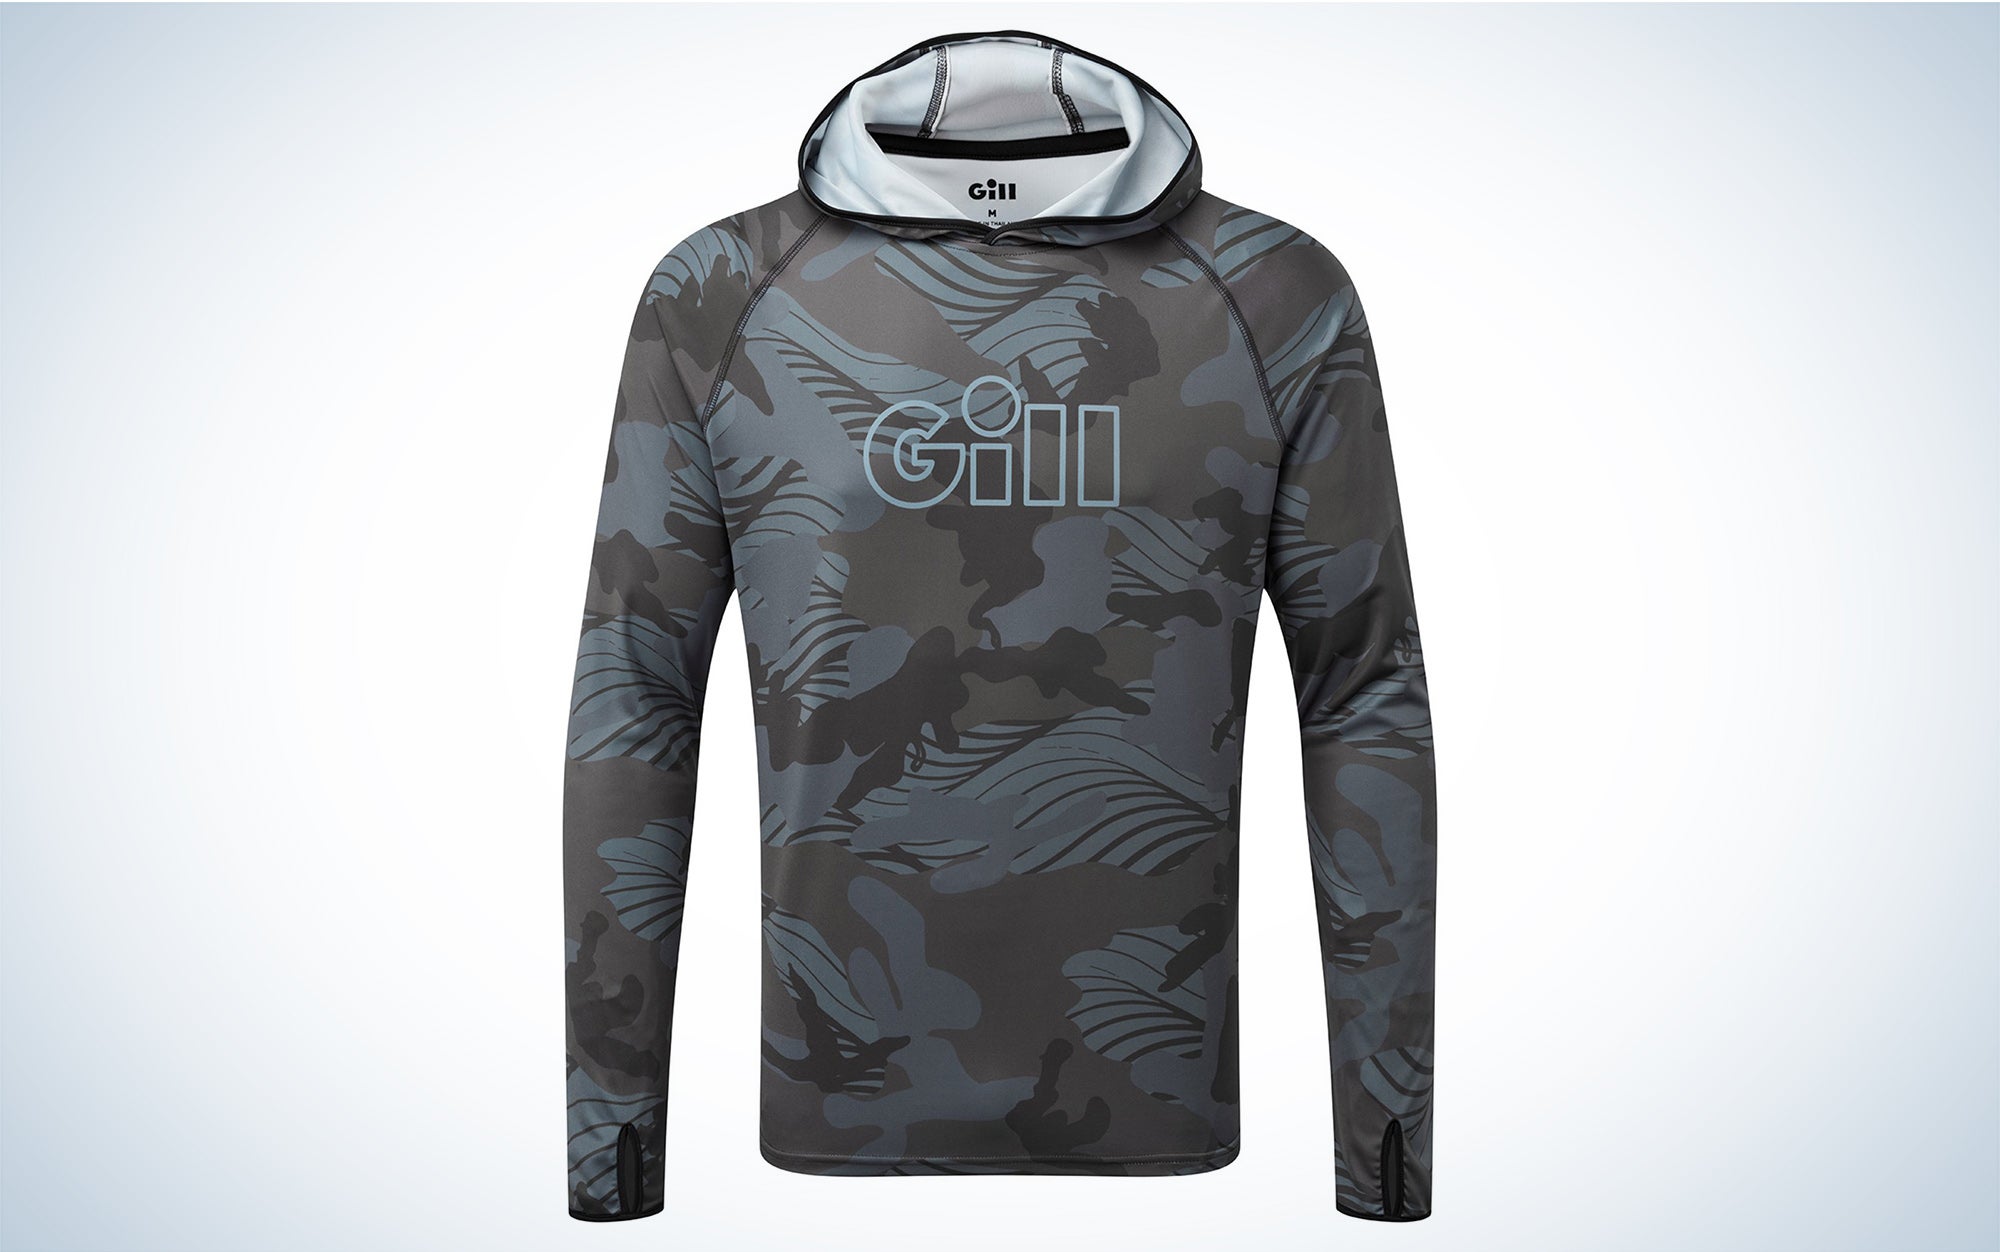 The Gill fishing shirt is the most fashion forward.